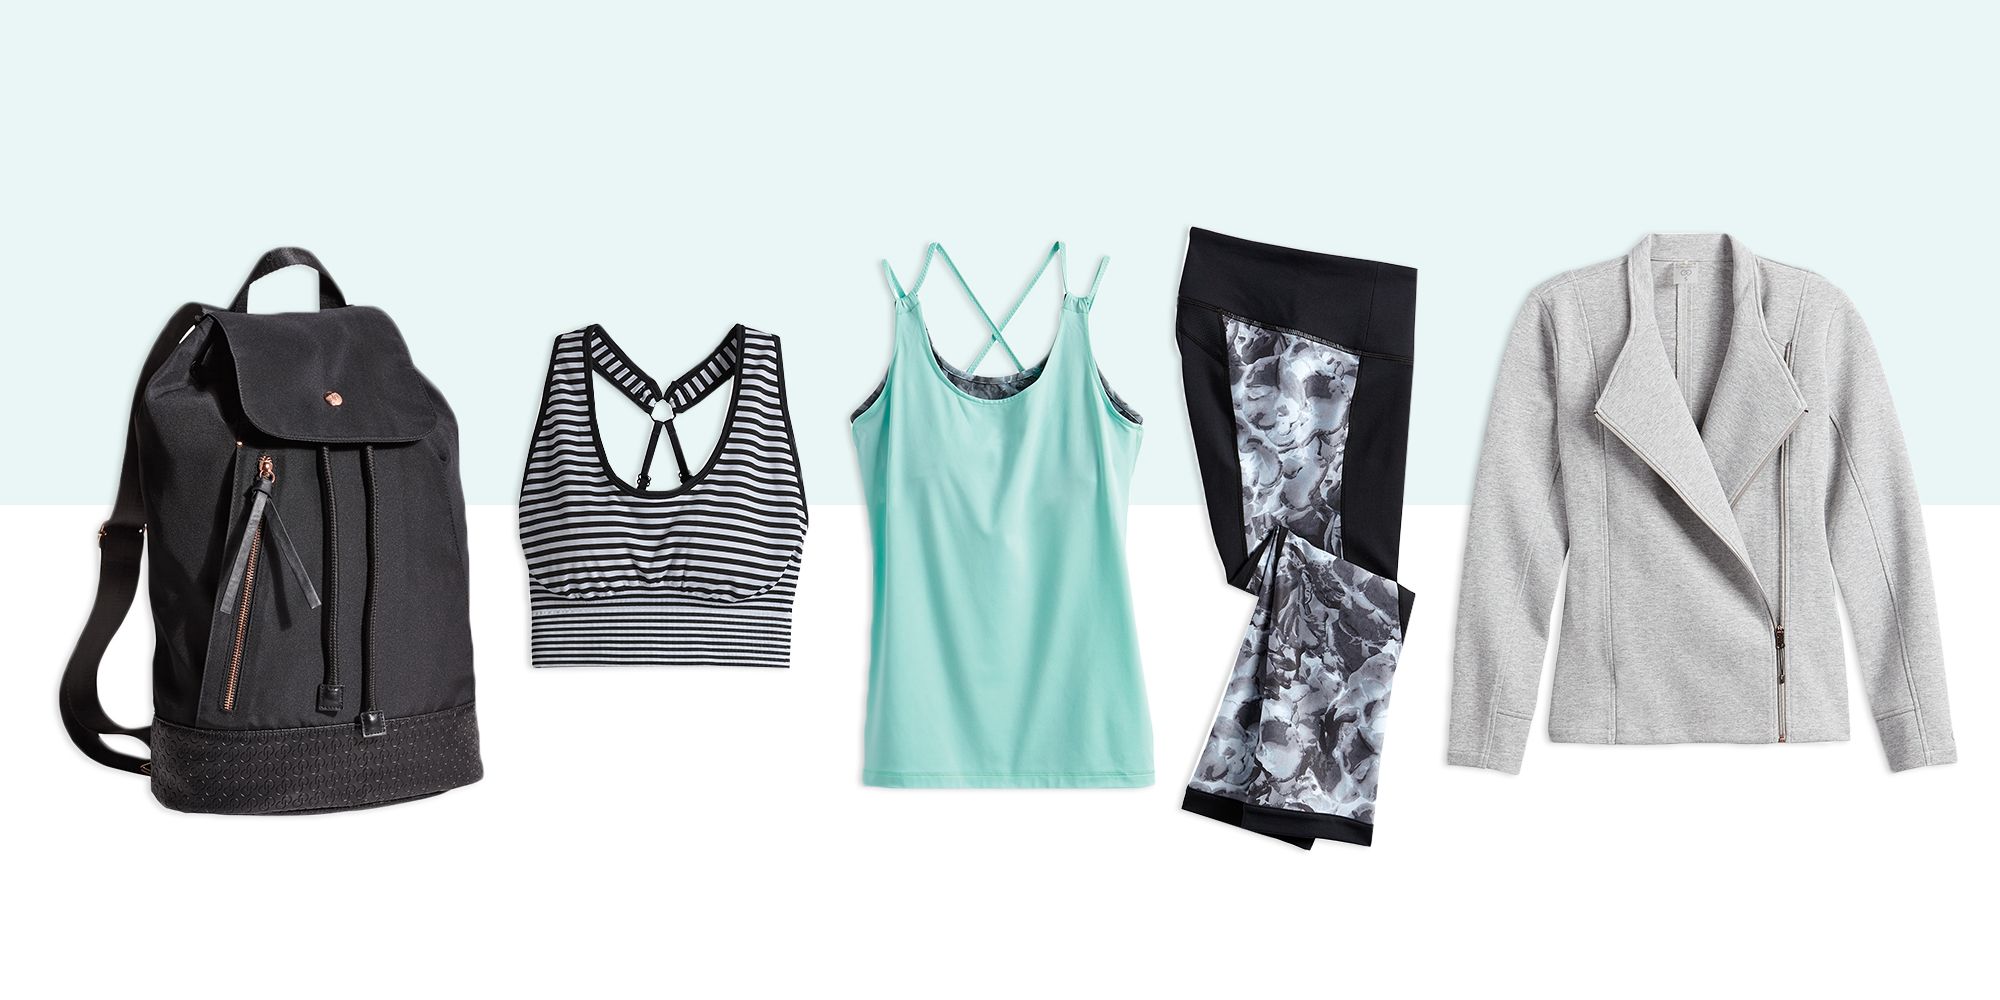 Calia fitness: Shop sporty pieces designed by Carrie Underwood